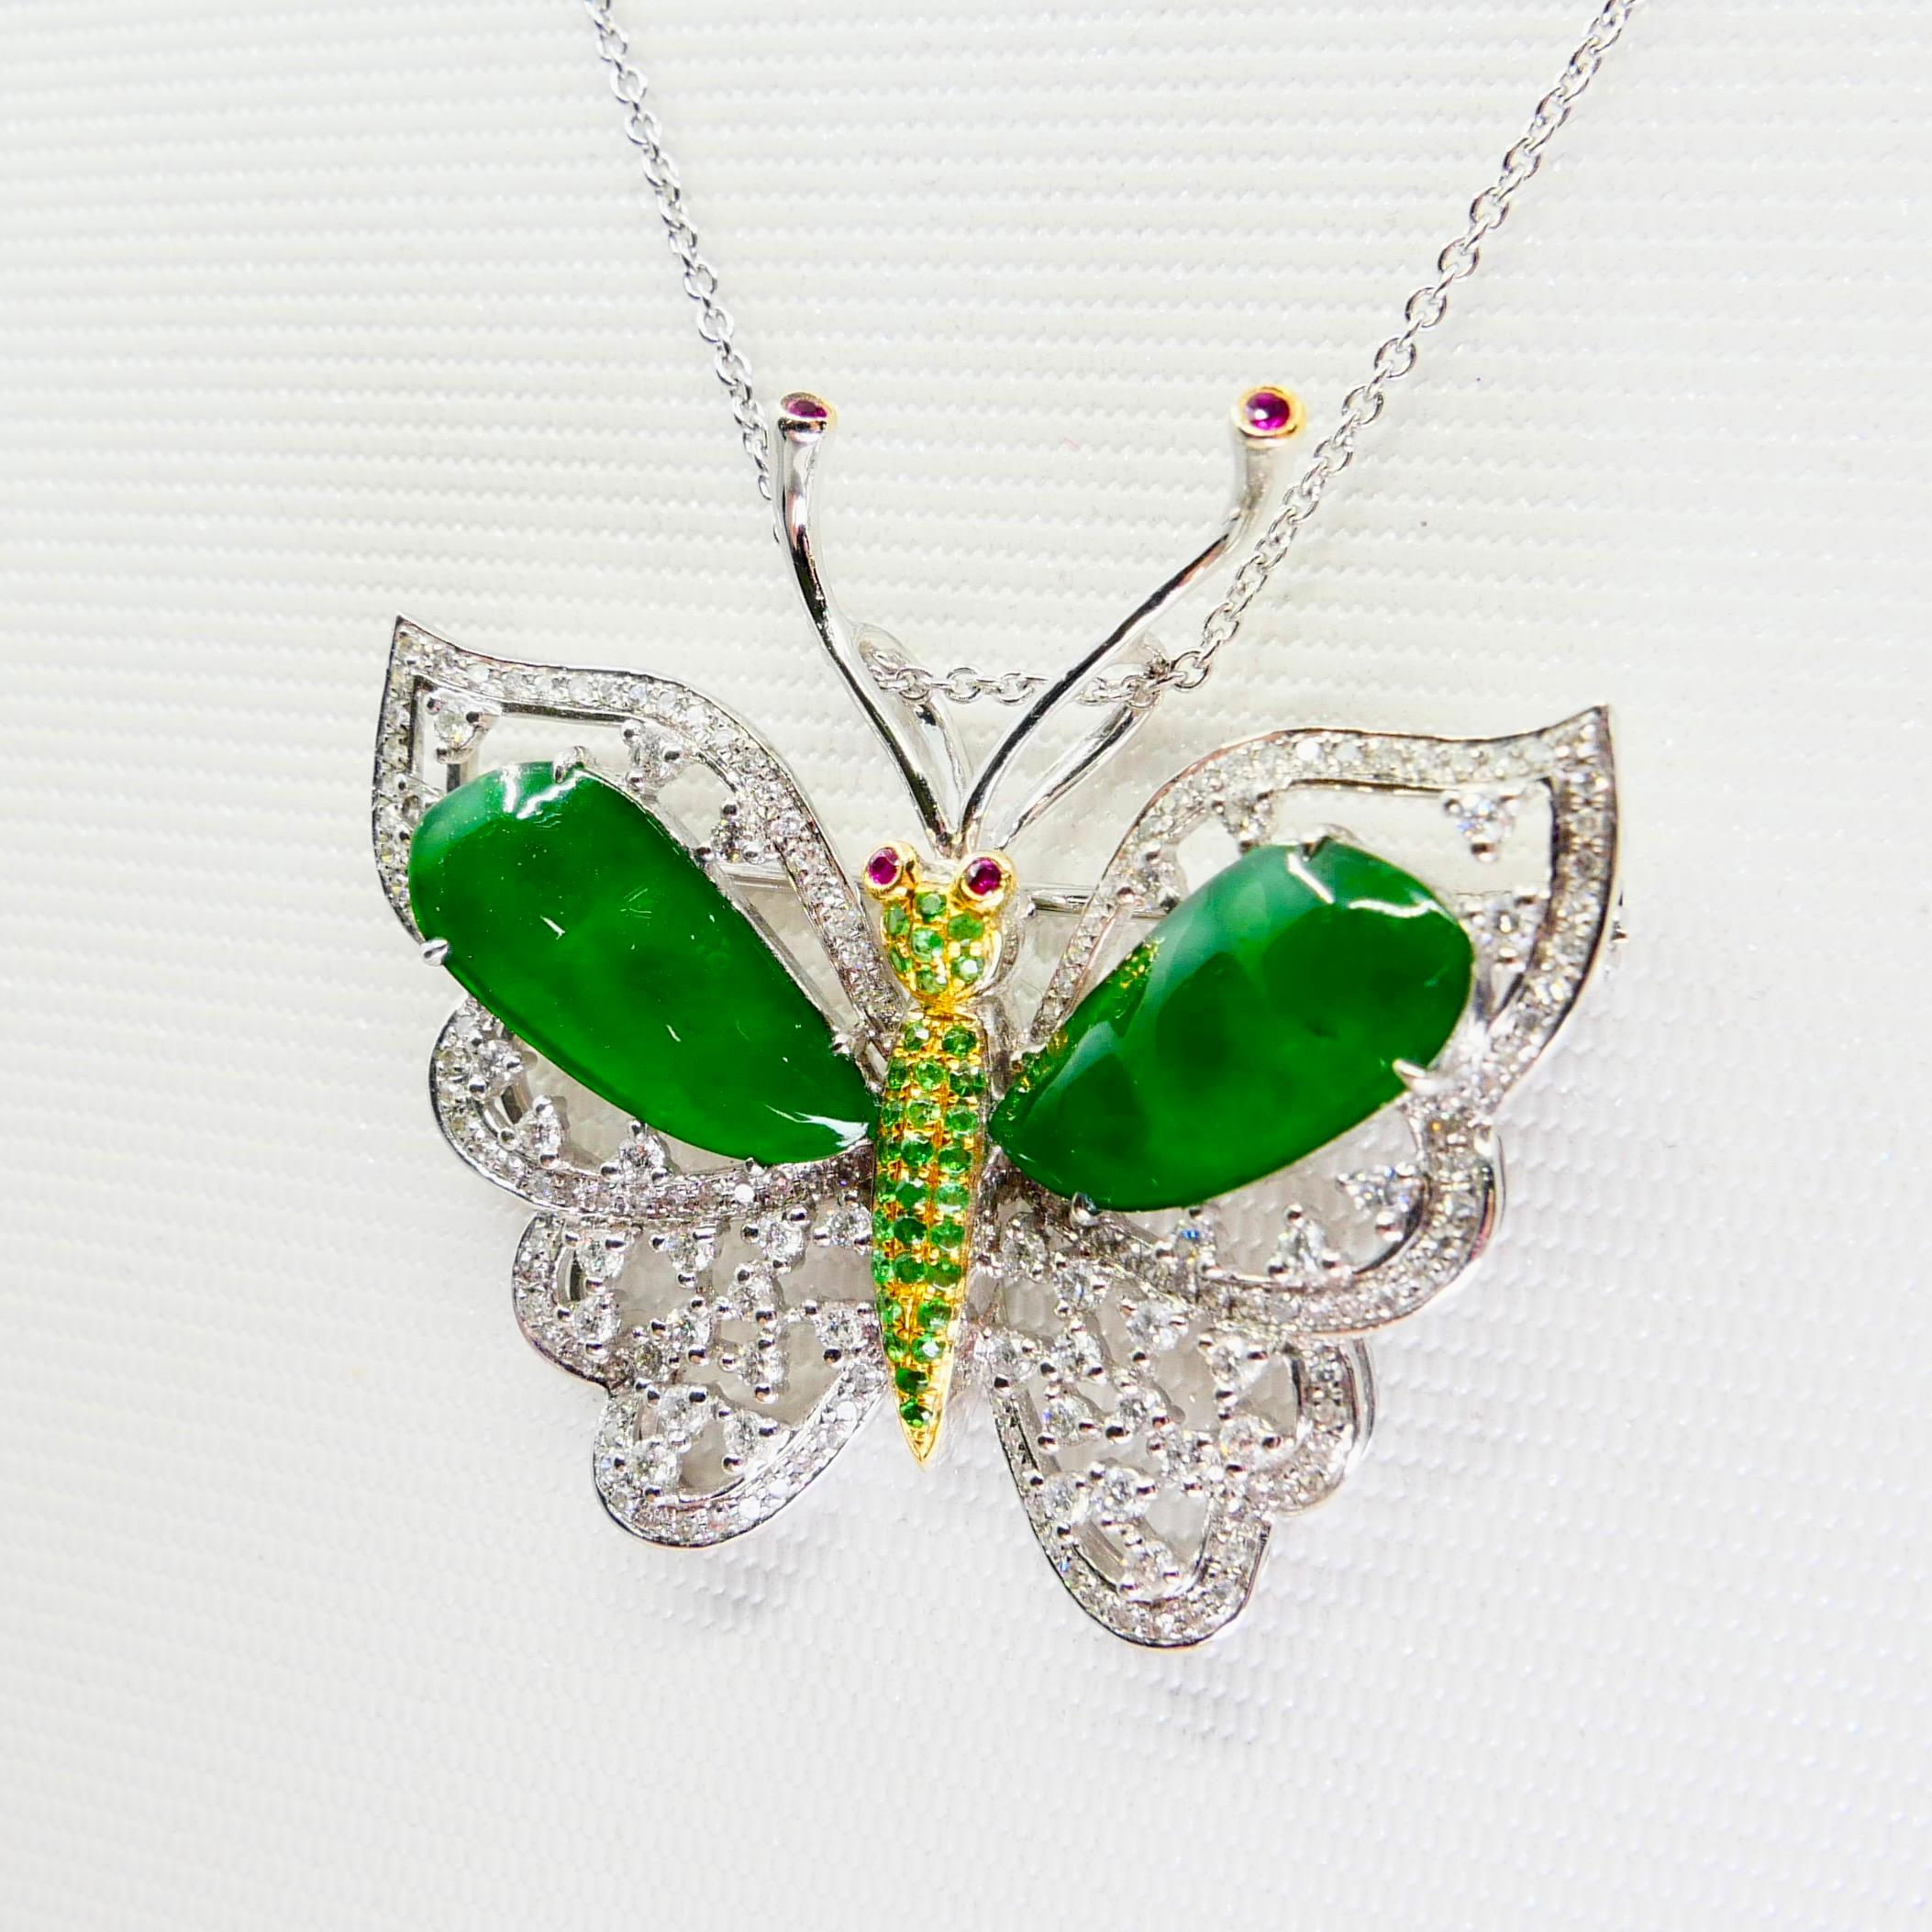 Certified Imperial Jade, Diamond Butterfly Pendant / Brooch, Collector Quality For Sale 2